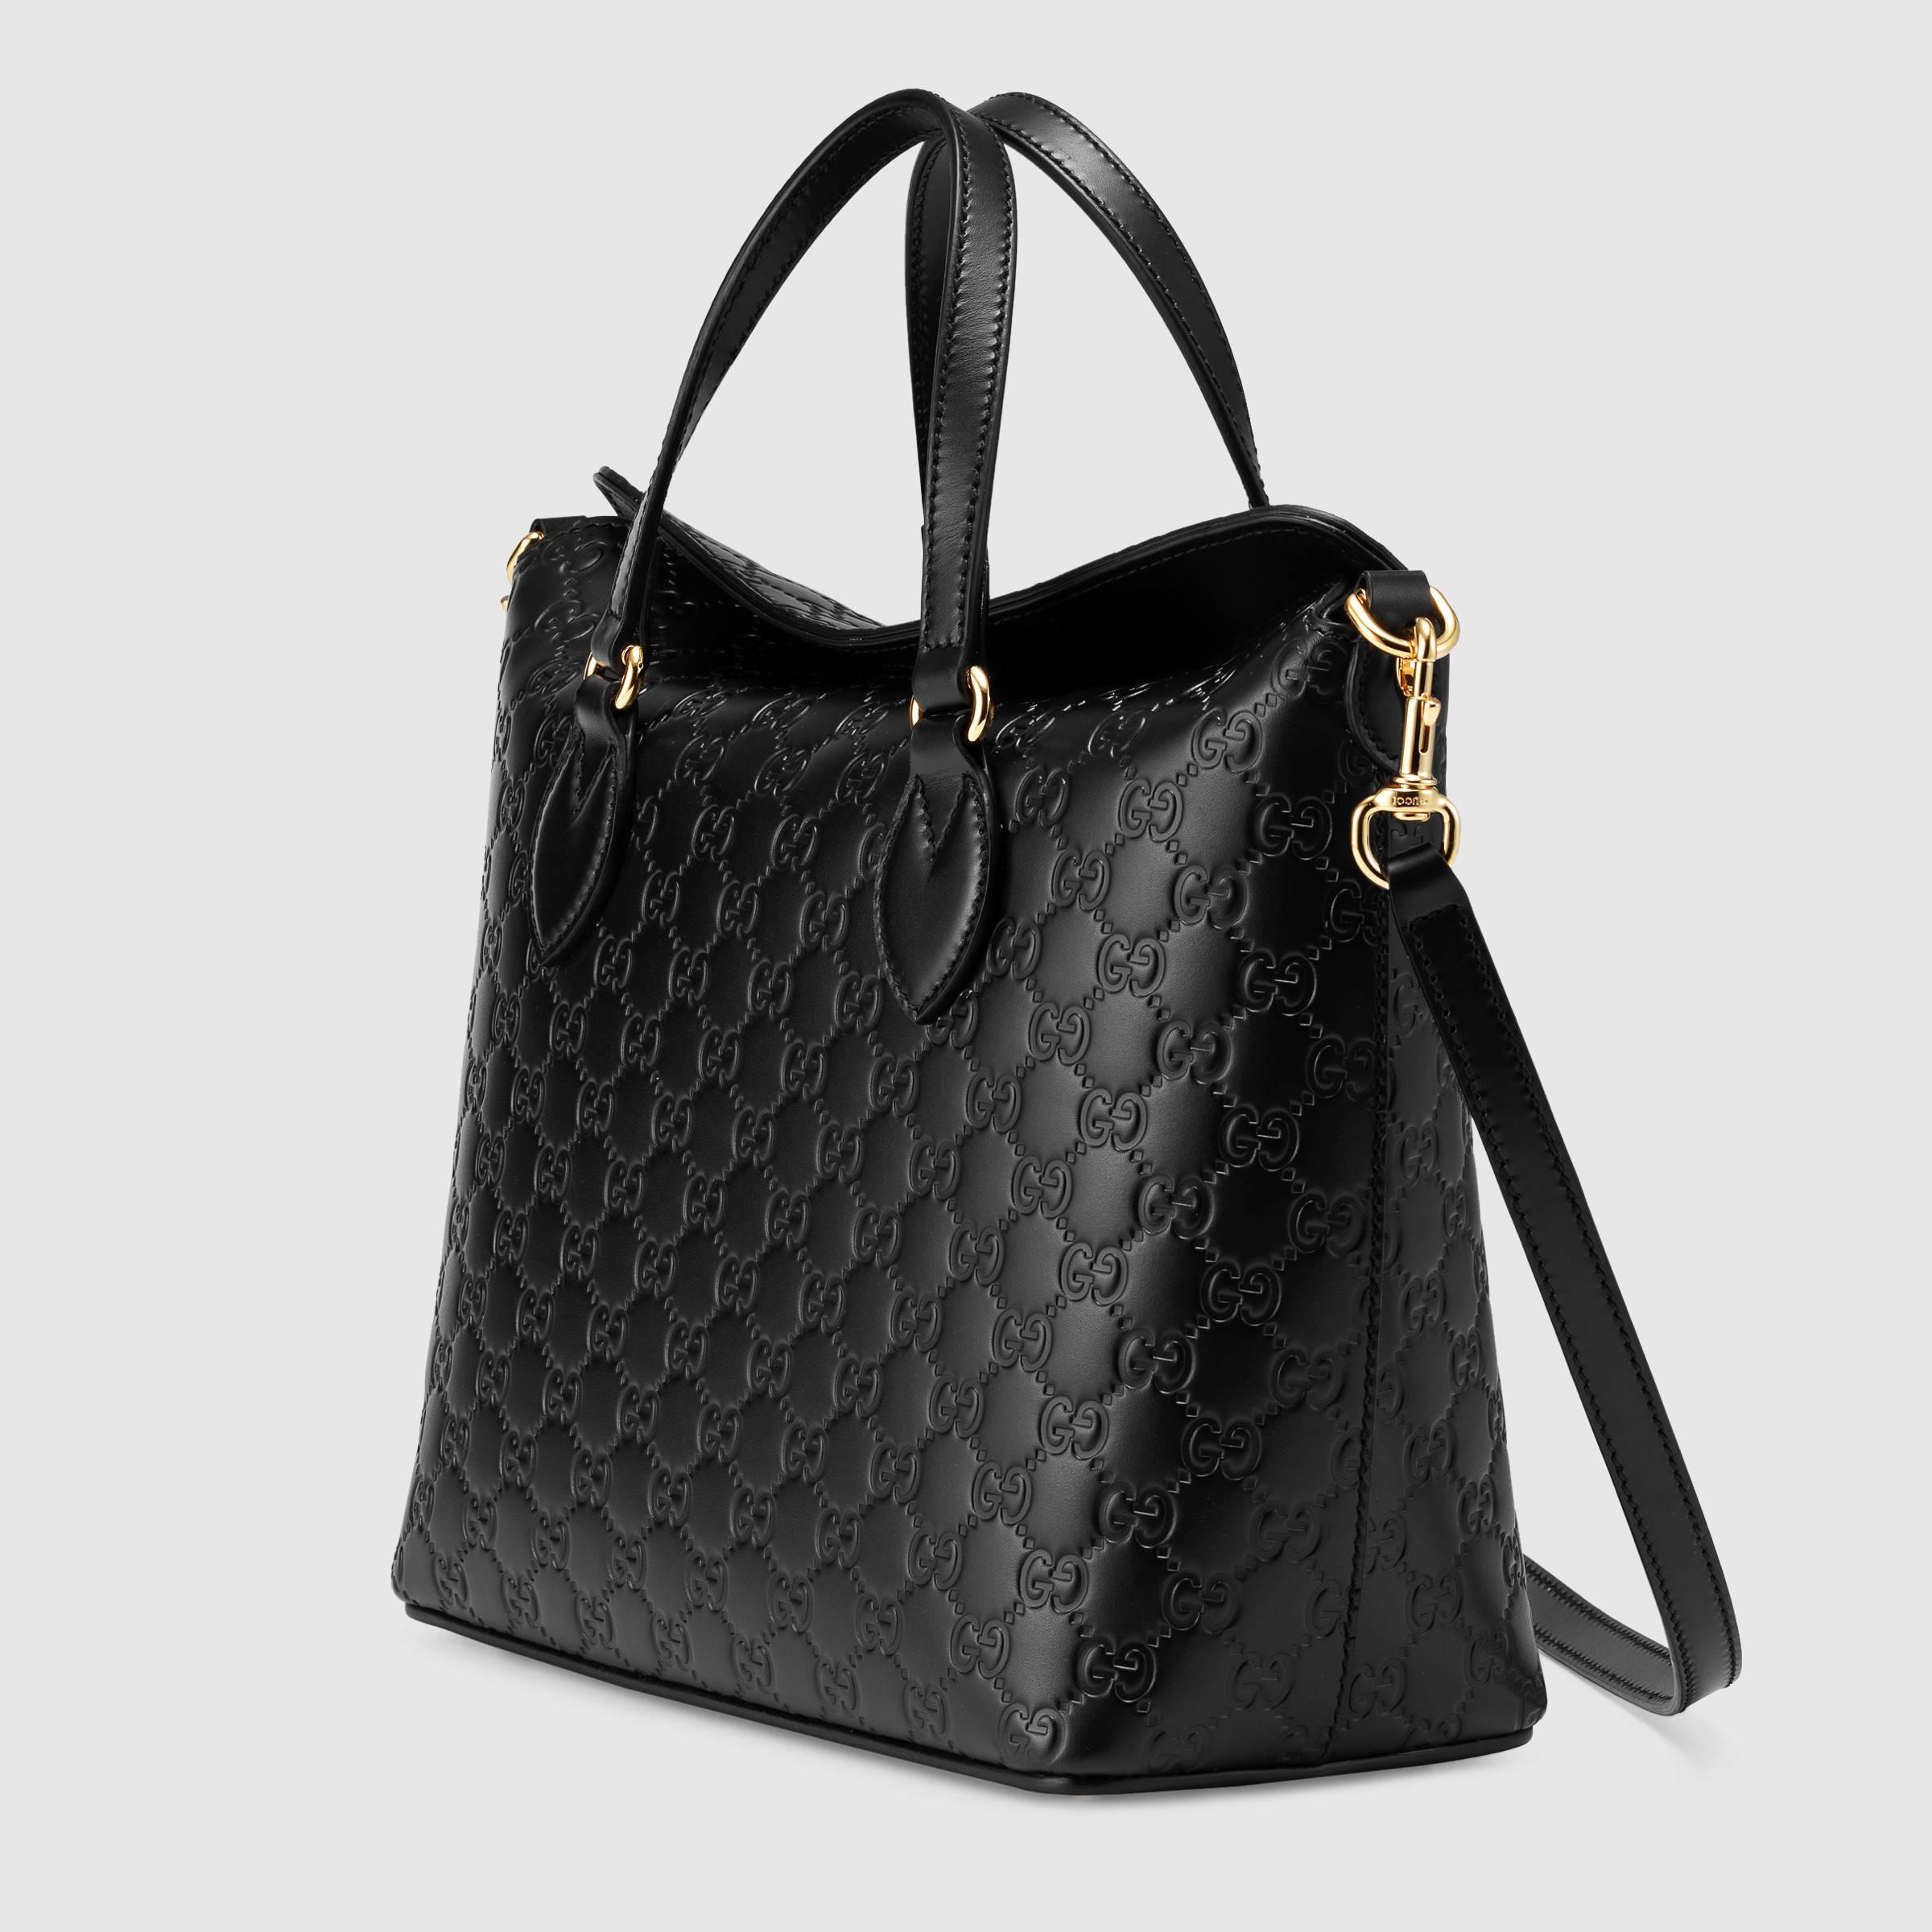 Lyst - Gucci Signature Leather Tote Bag in Black